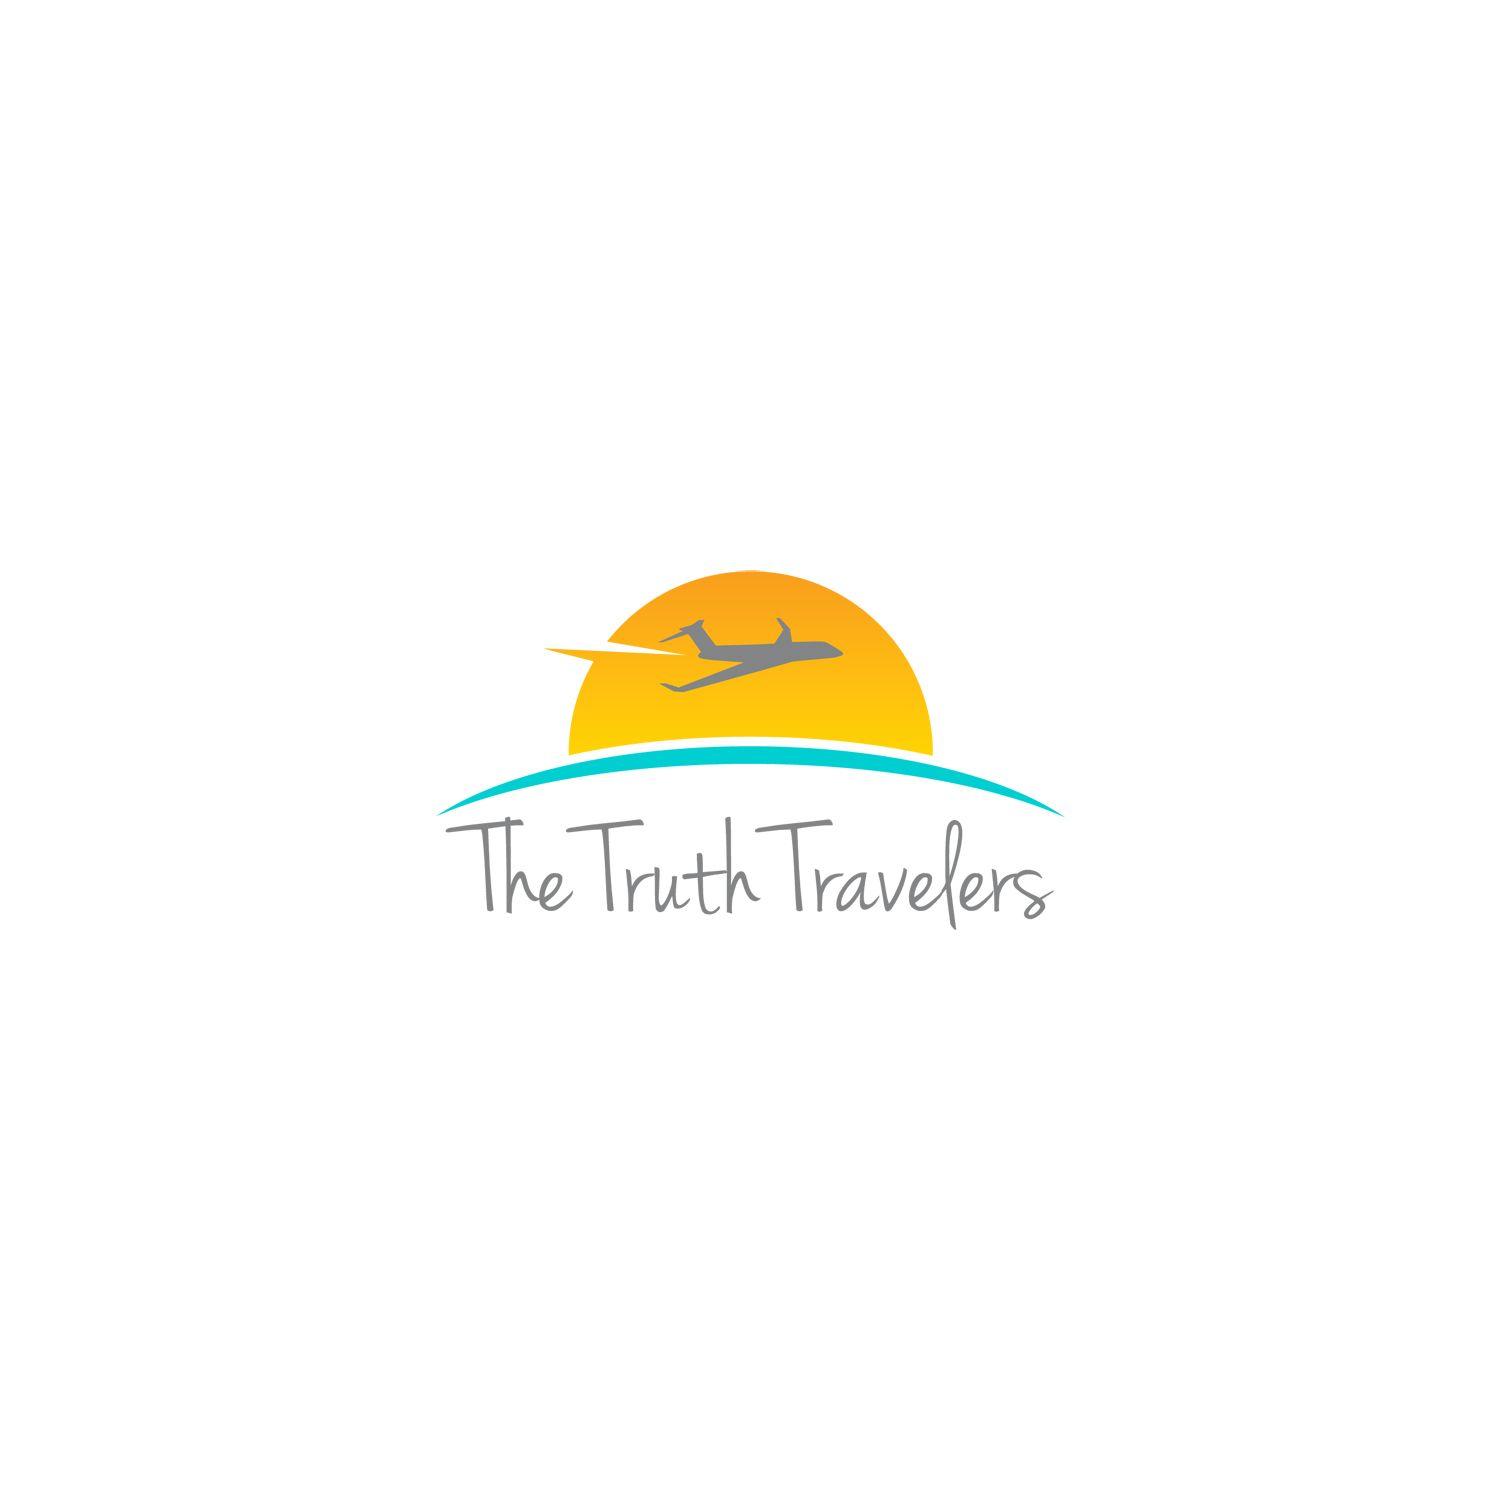 Travelers Logo - Upmarket, Modern, It Company Logo Design for The Truth Travelers by ...